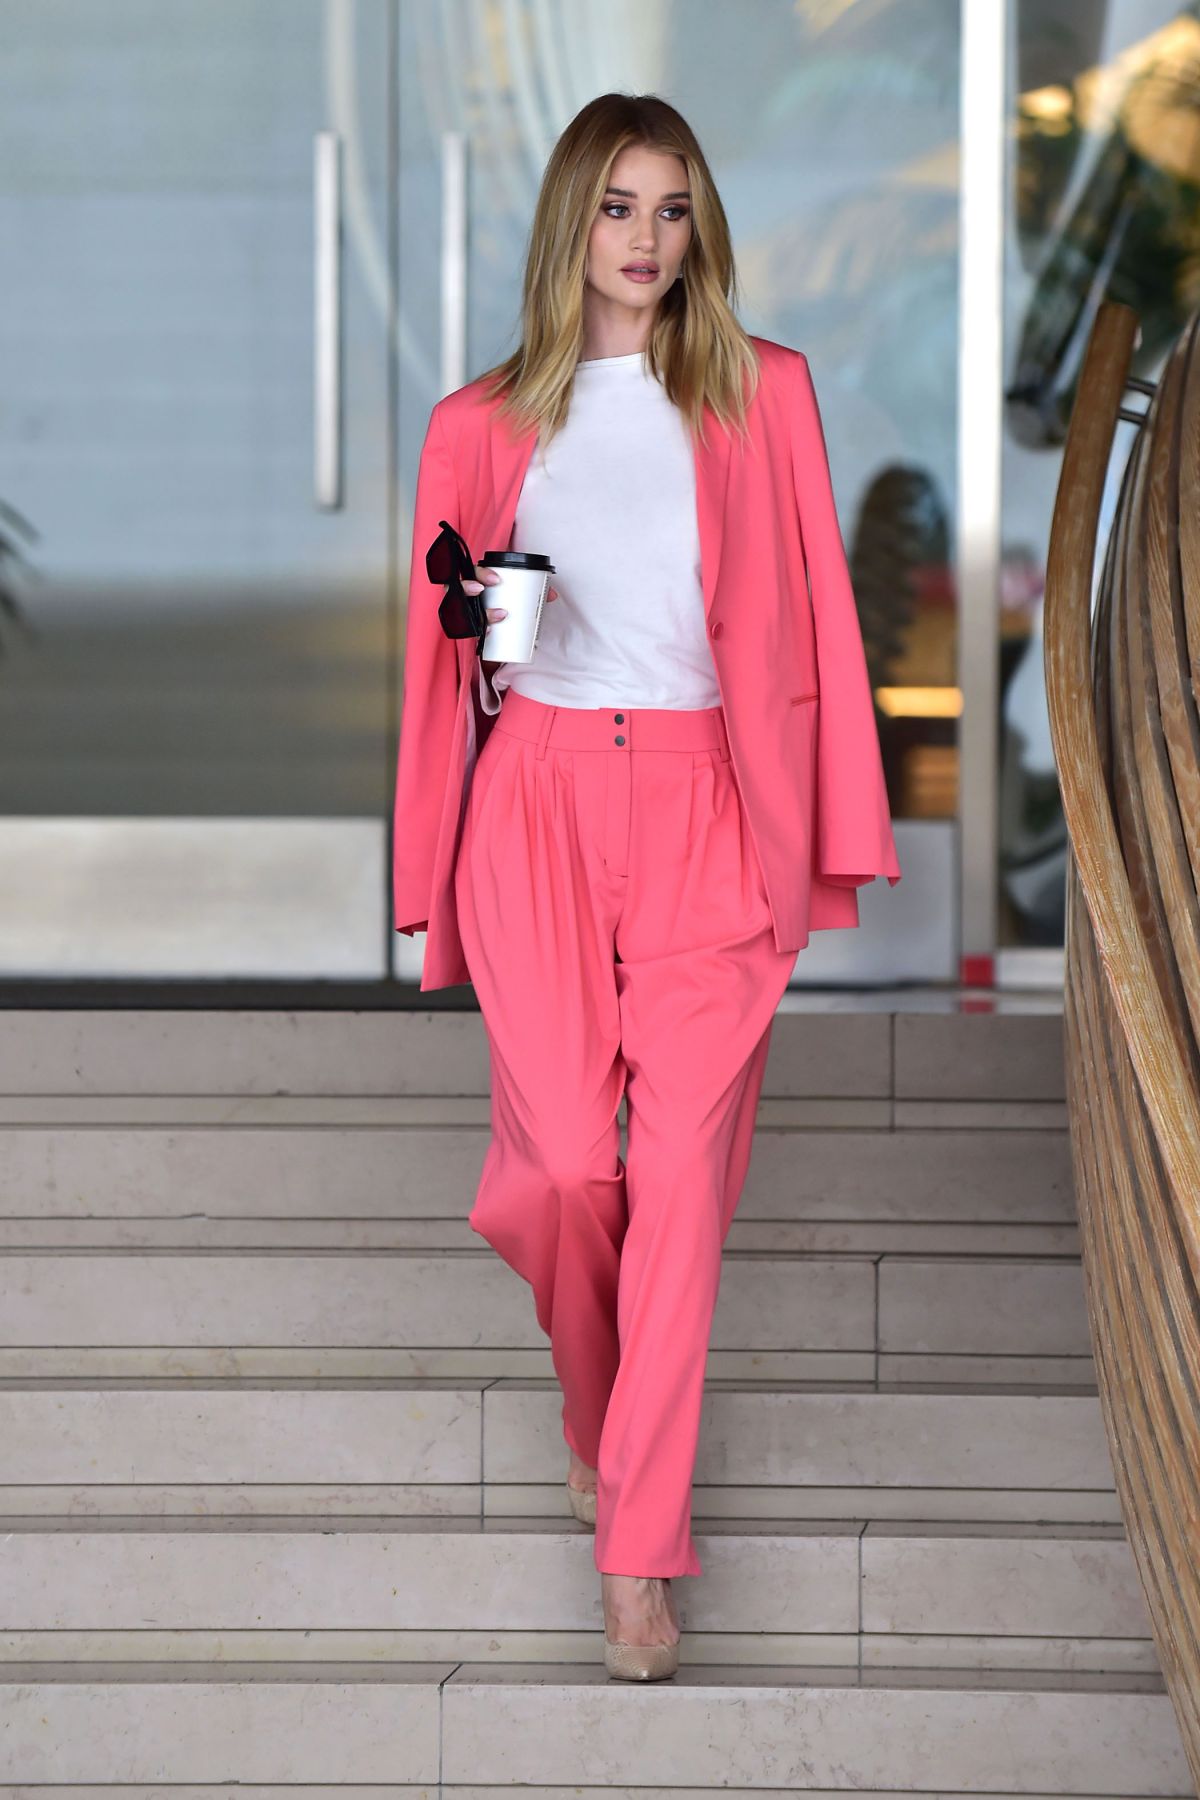 rosie-huntington-whiteley-out-in-beverly-hills-04-01-2019-7.jpg